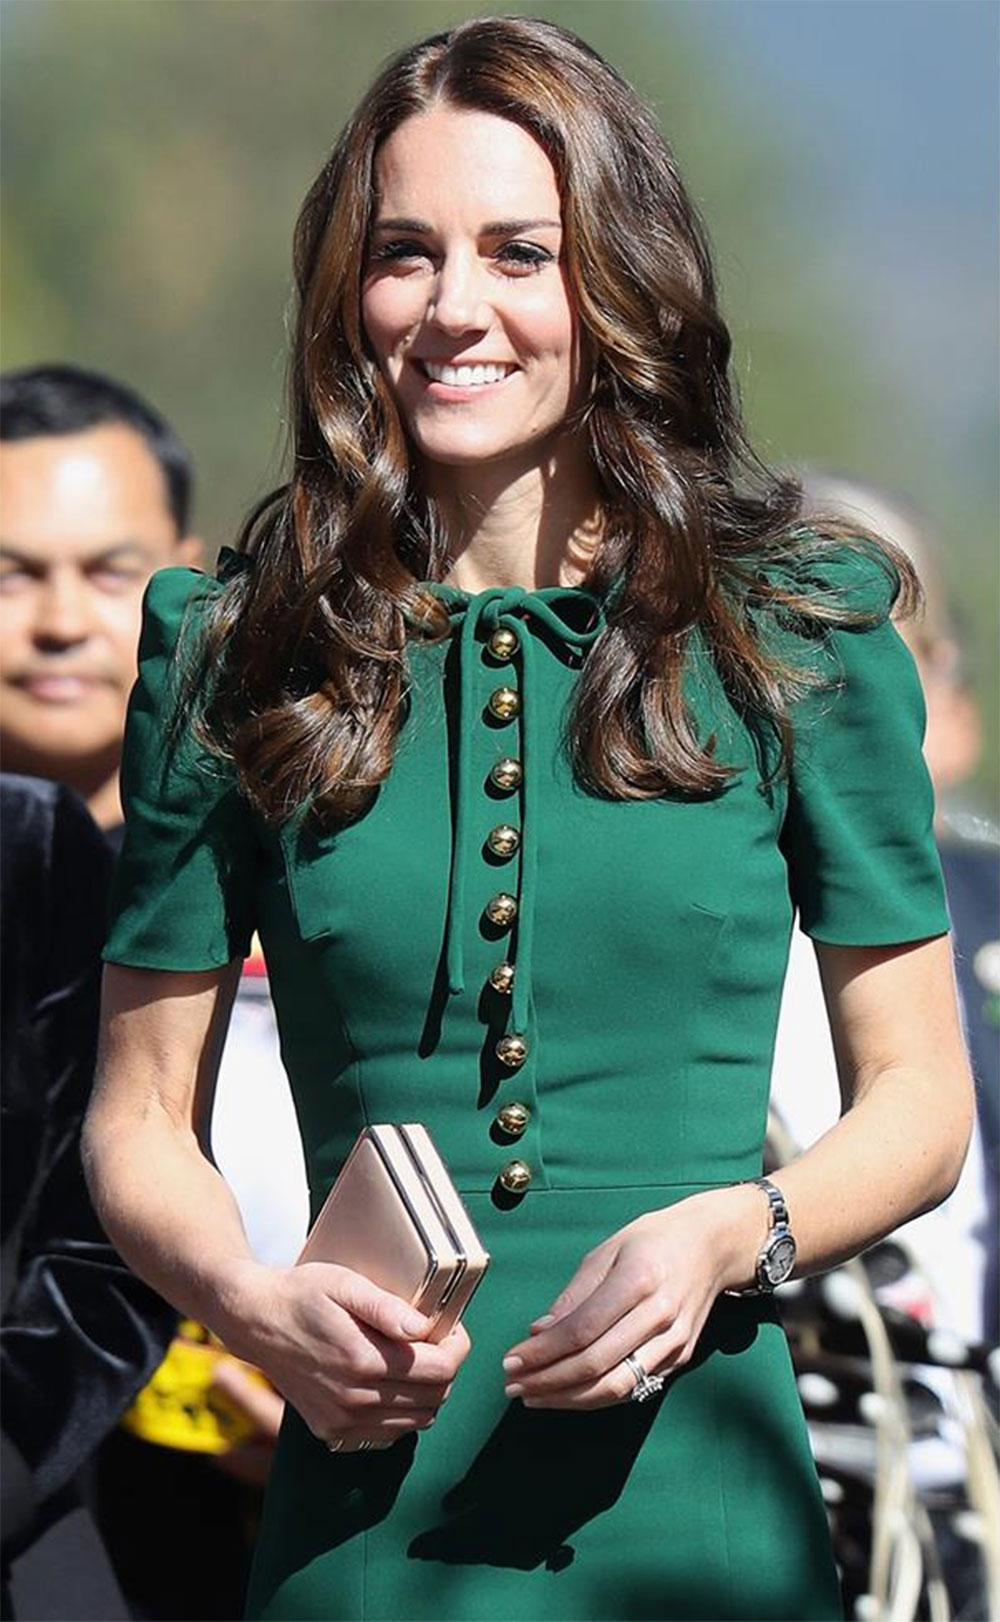 Day 4: The Duchess opted for an emerald-green Dolce & Gabbana dress to visit the University of British Columbia.